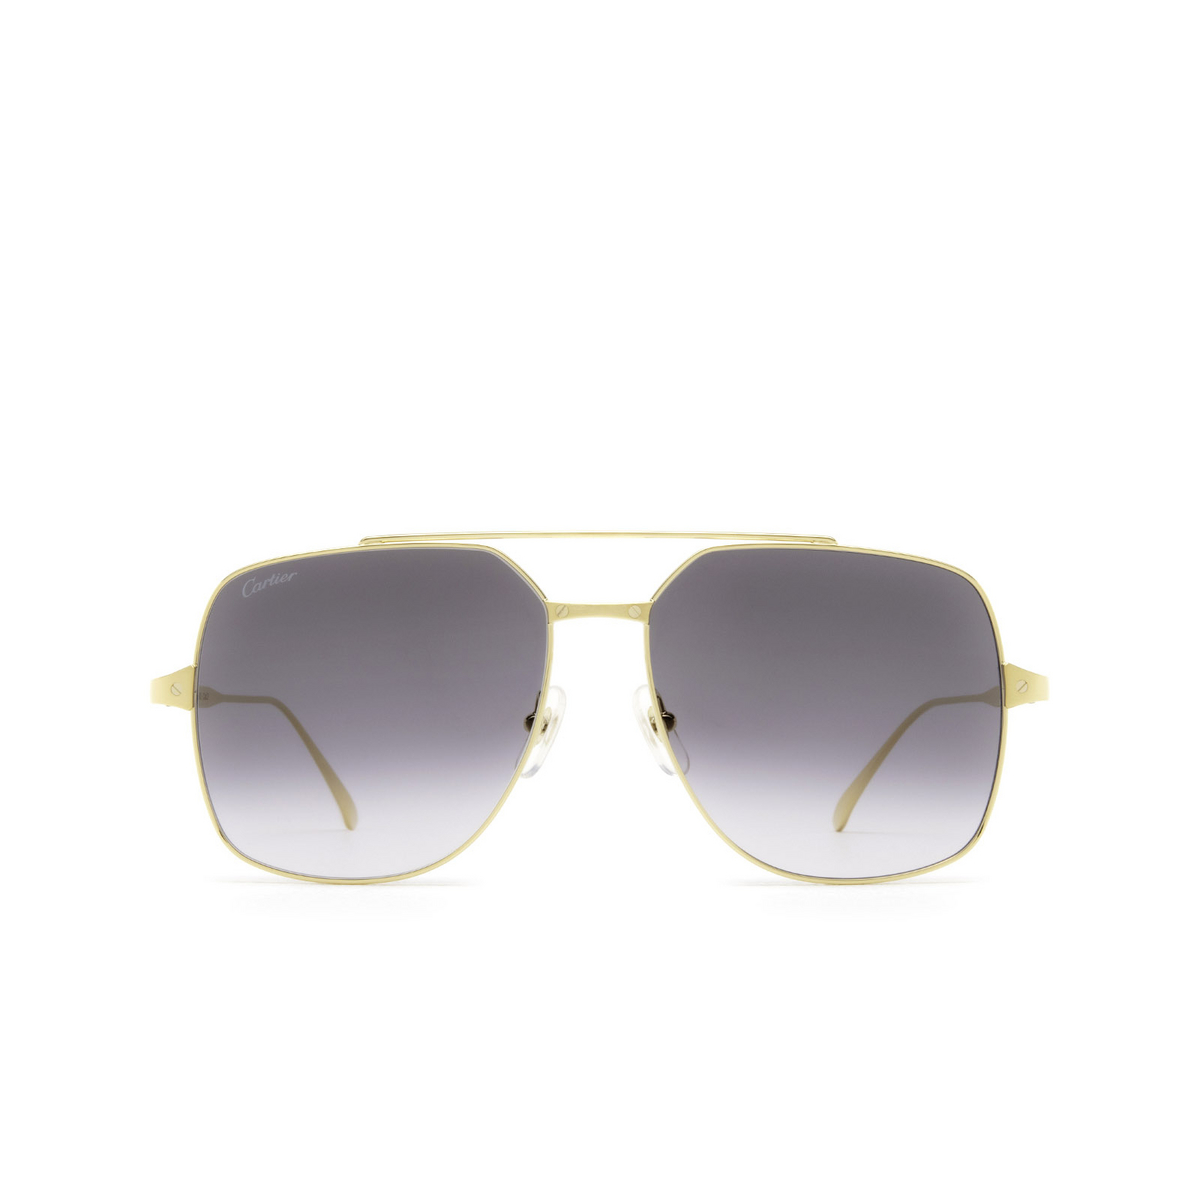 Cartier® Square Sunglasses: CT0329S color Gold 001 - front view.